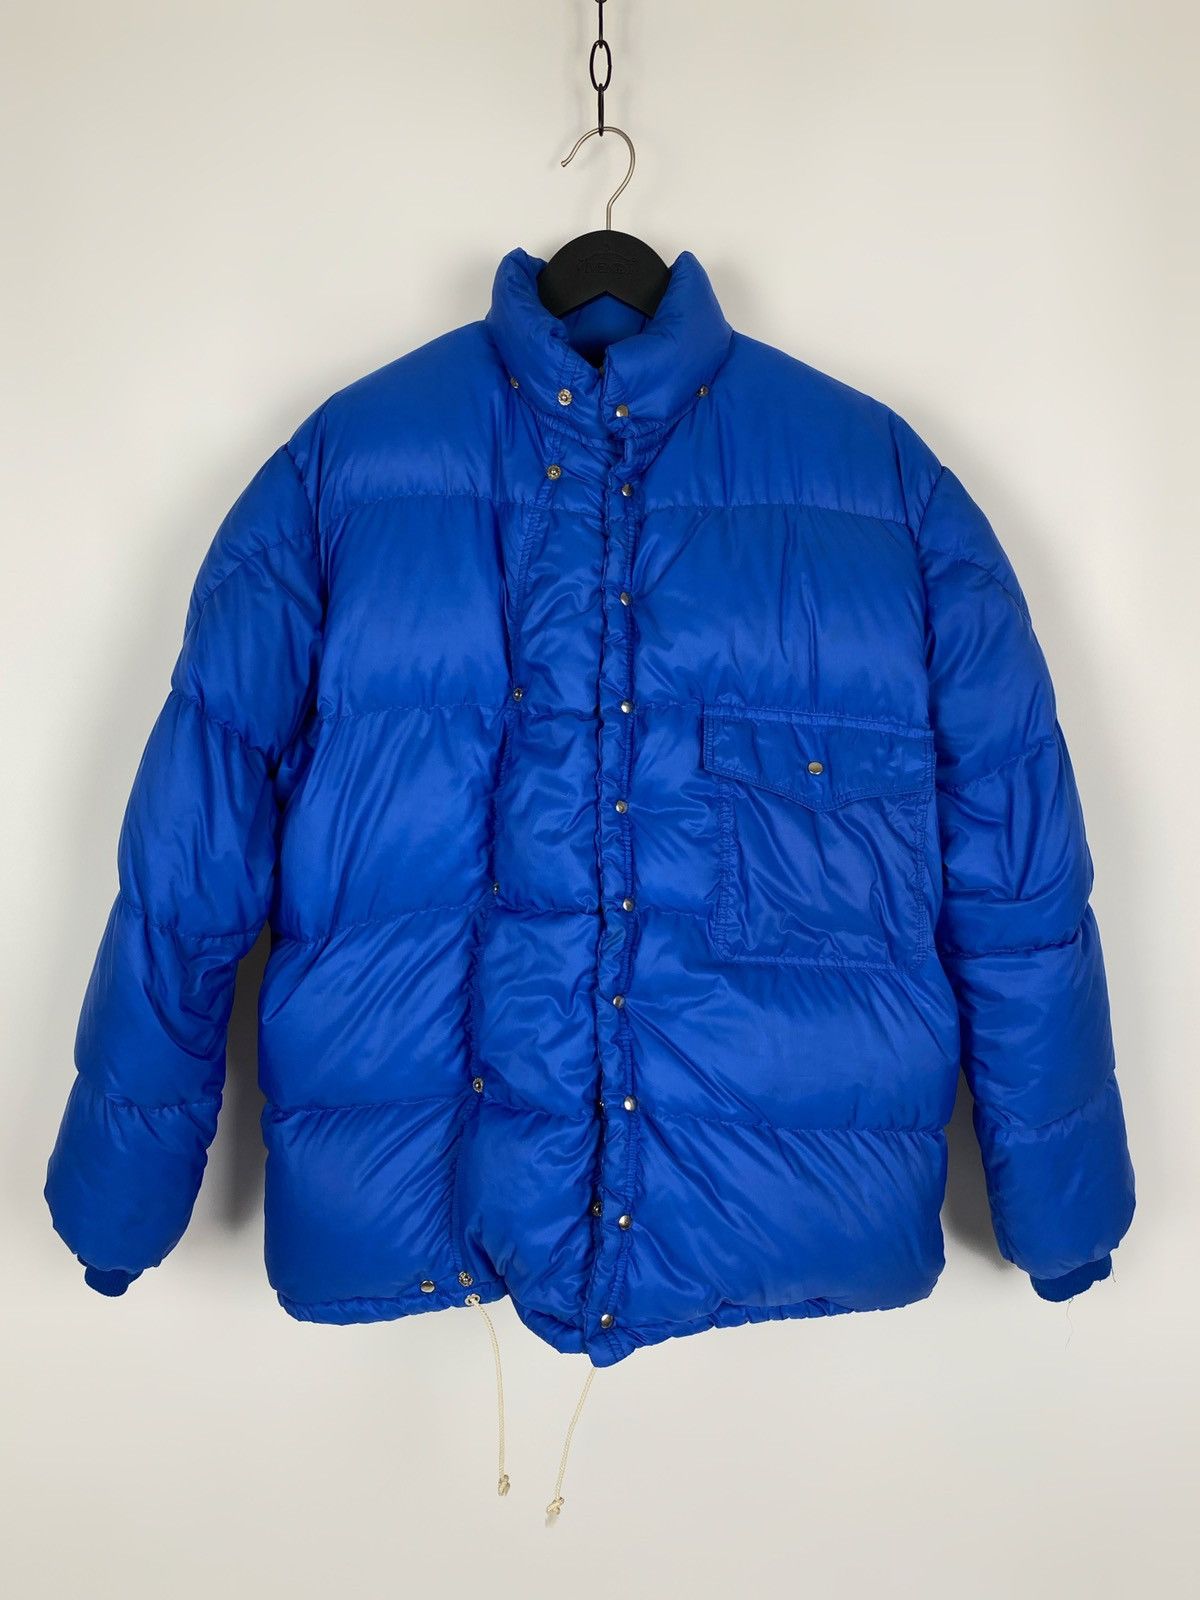 Moncler 60‘s Vintage Moncler by Lionel Terray Down Jacket | Grailed